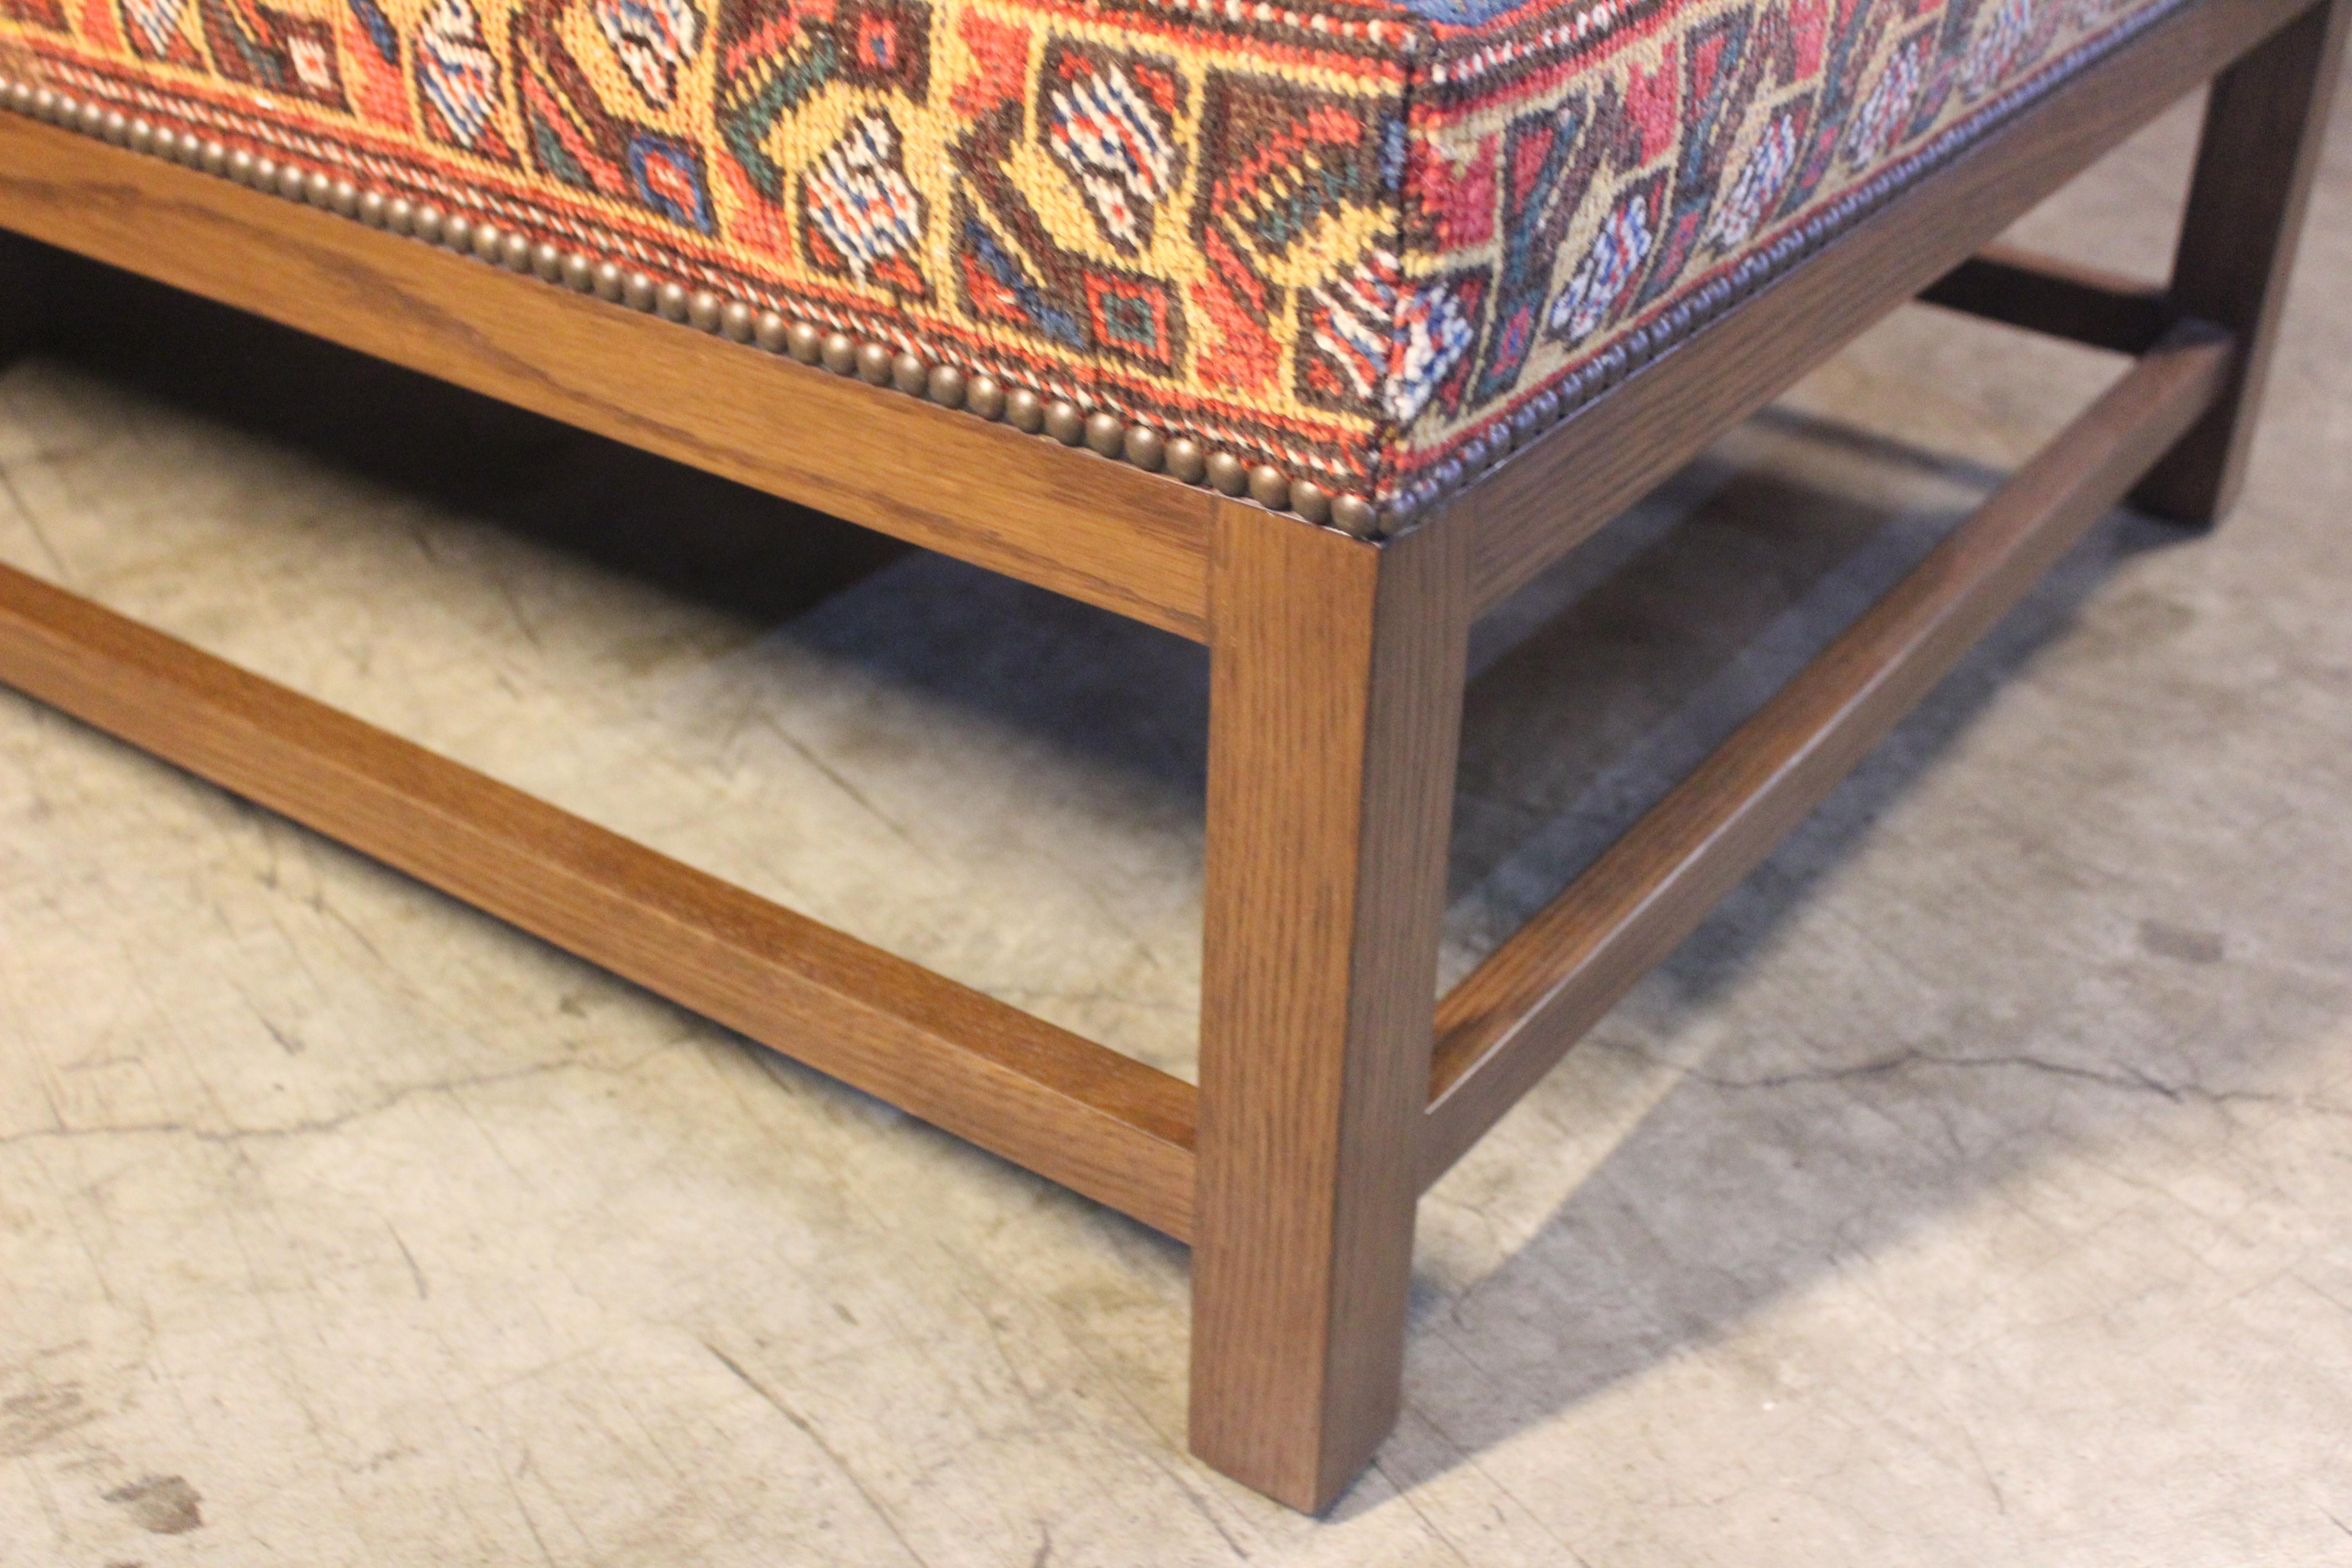 Lexington Ottoman Upholstered in a Vintage Turkish Rug 11